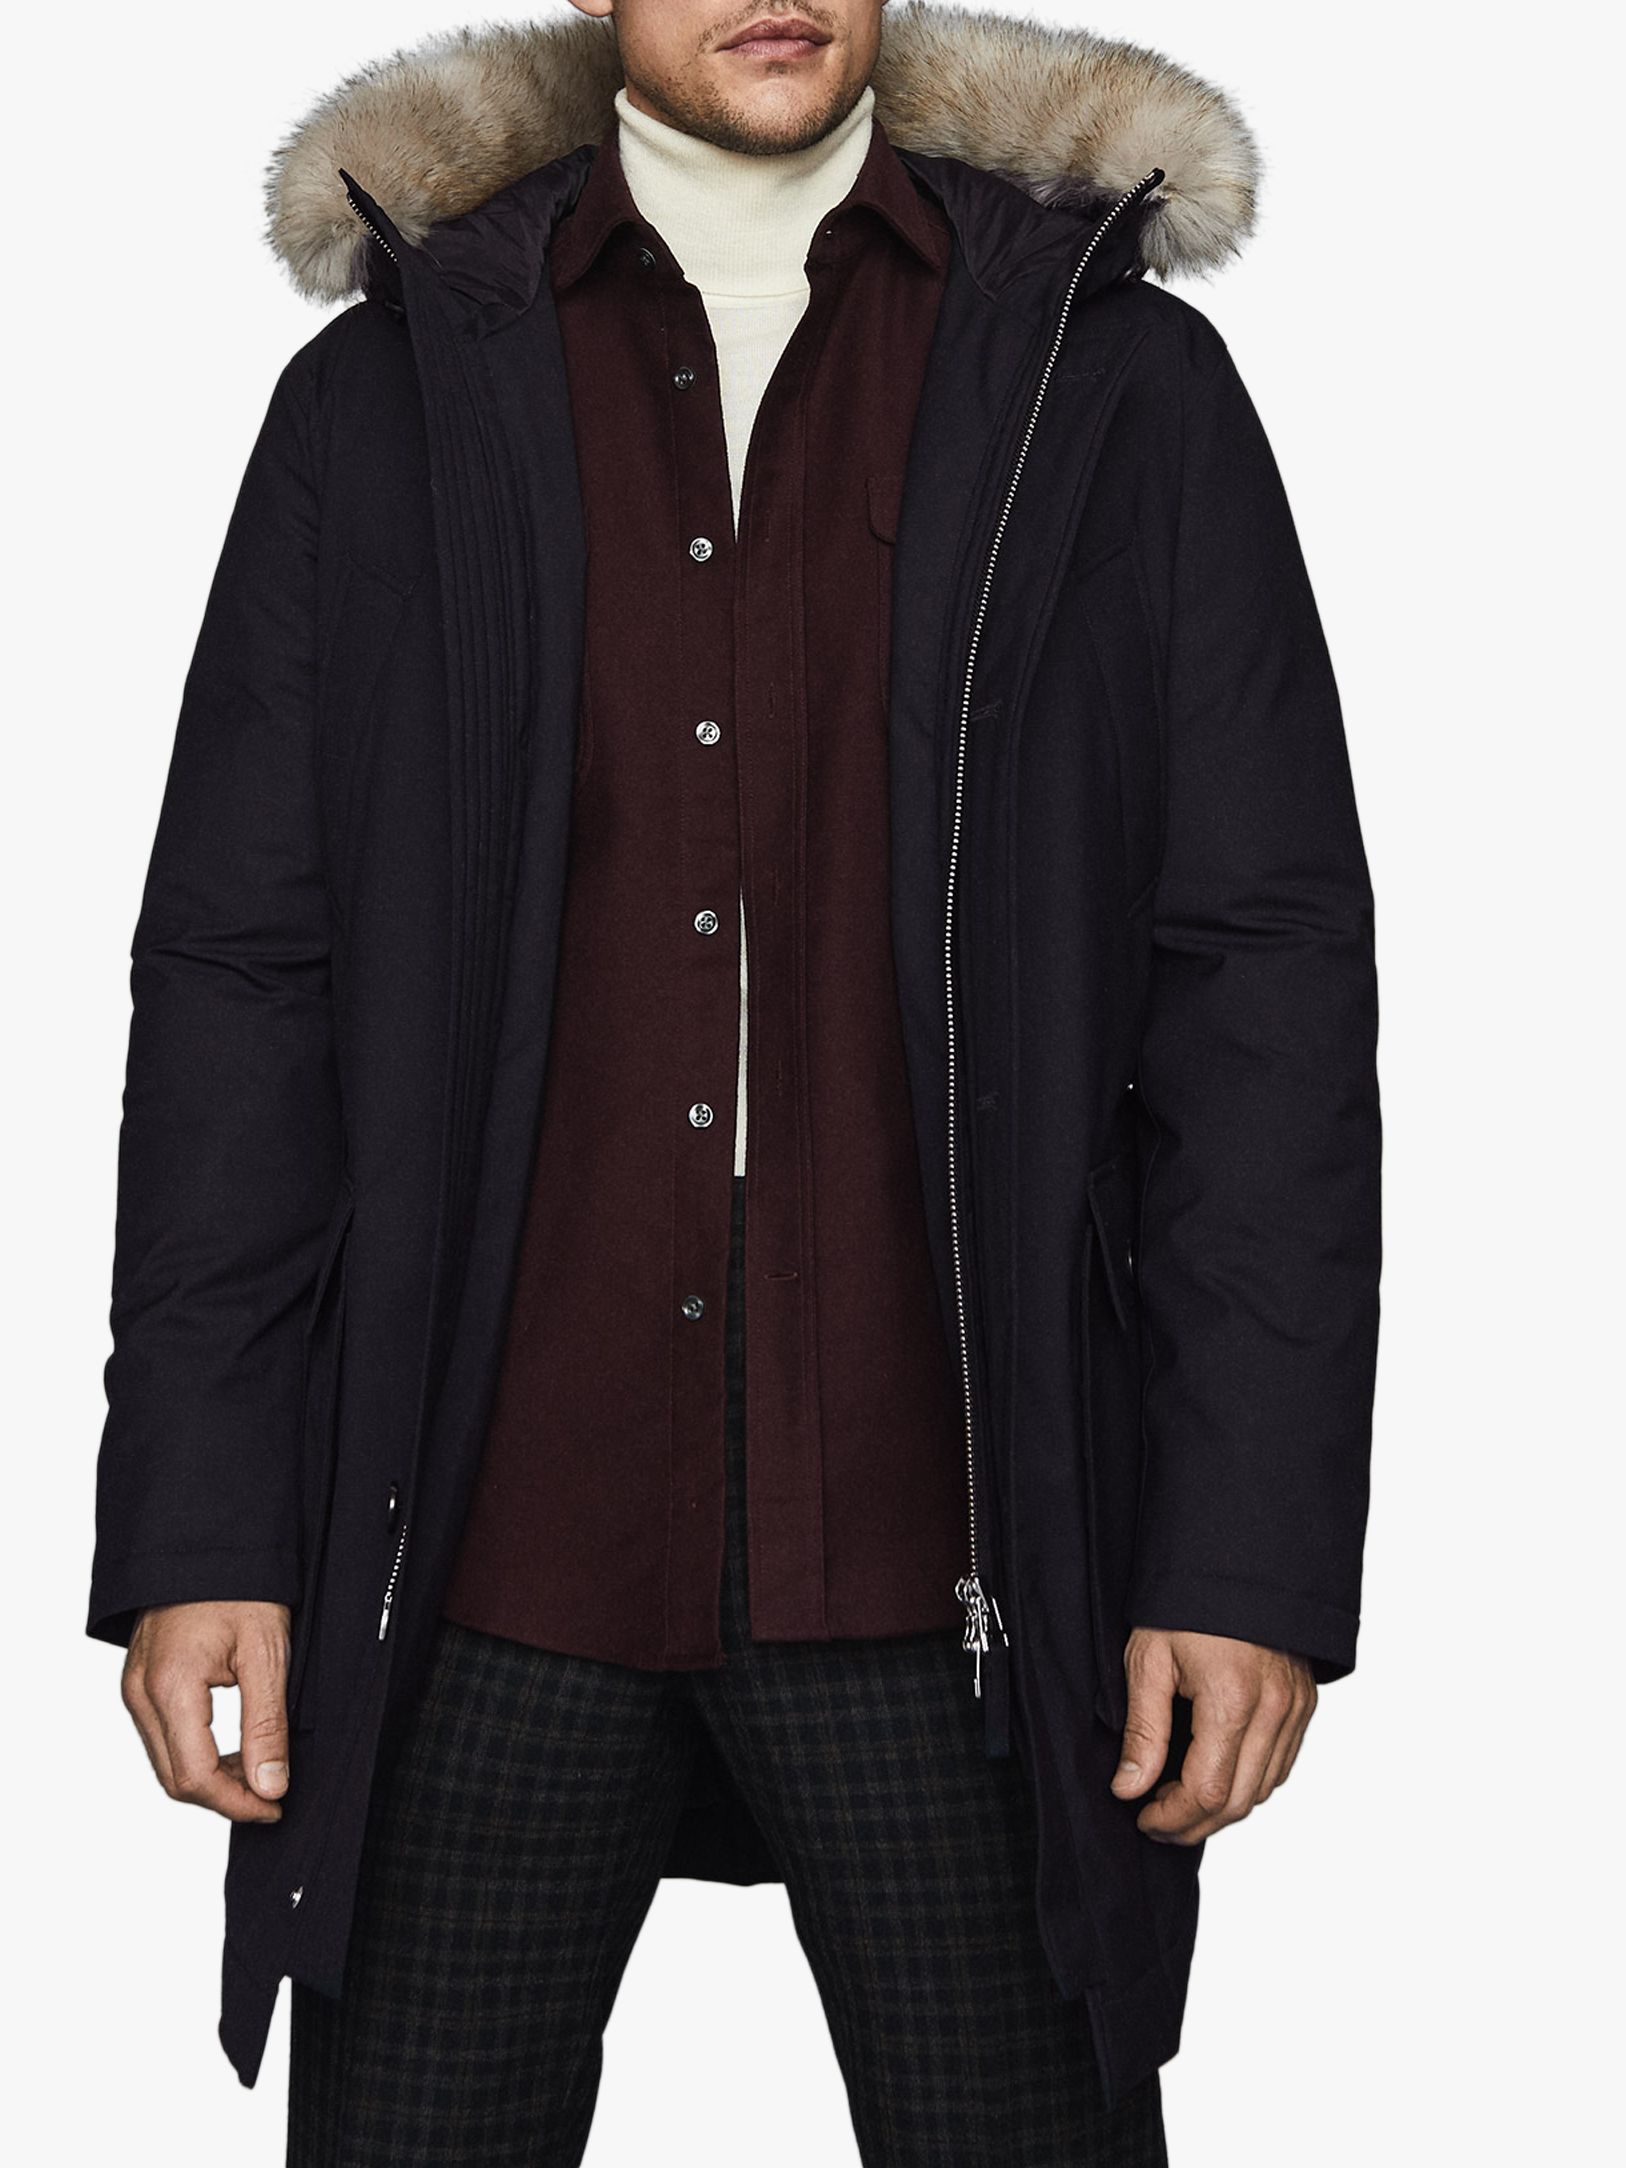 Reiss Pacific Faux Fur Hooded Parka, Navy at John Lewis & Partners